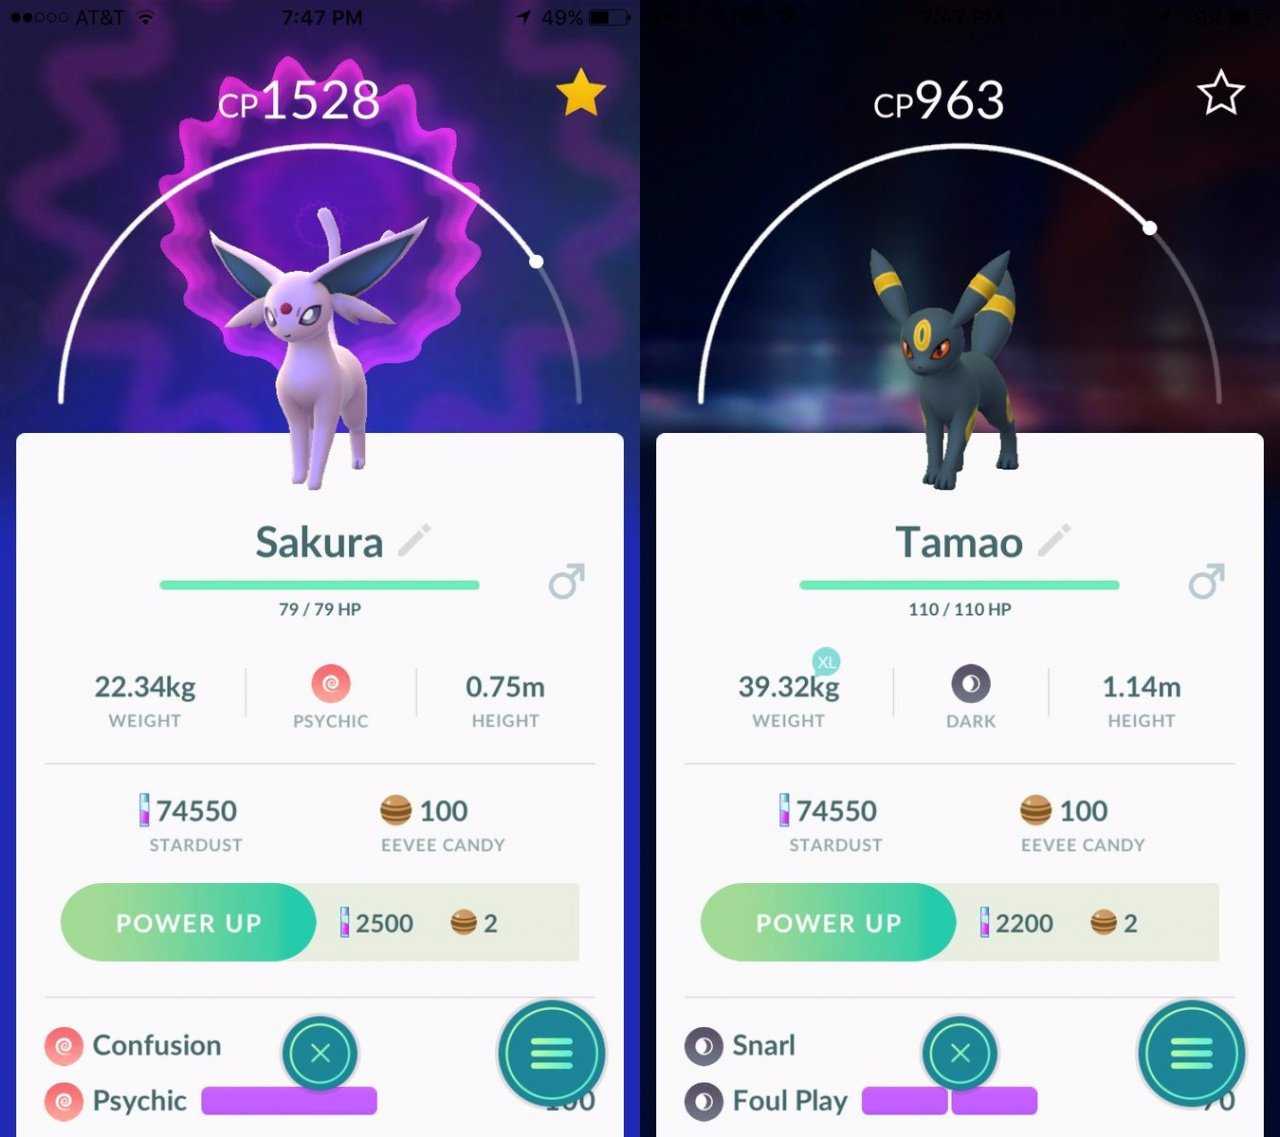 Bug? Evolving Eevee at night shows Espeon not Umbreon : r/TheSilphRoad